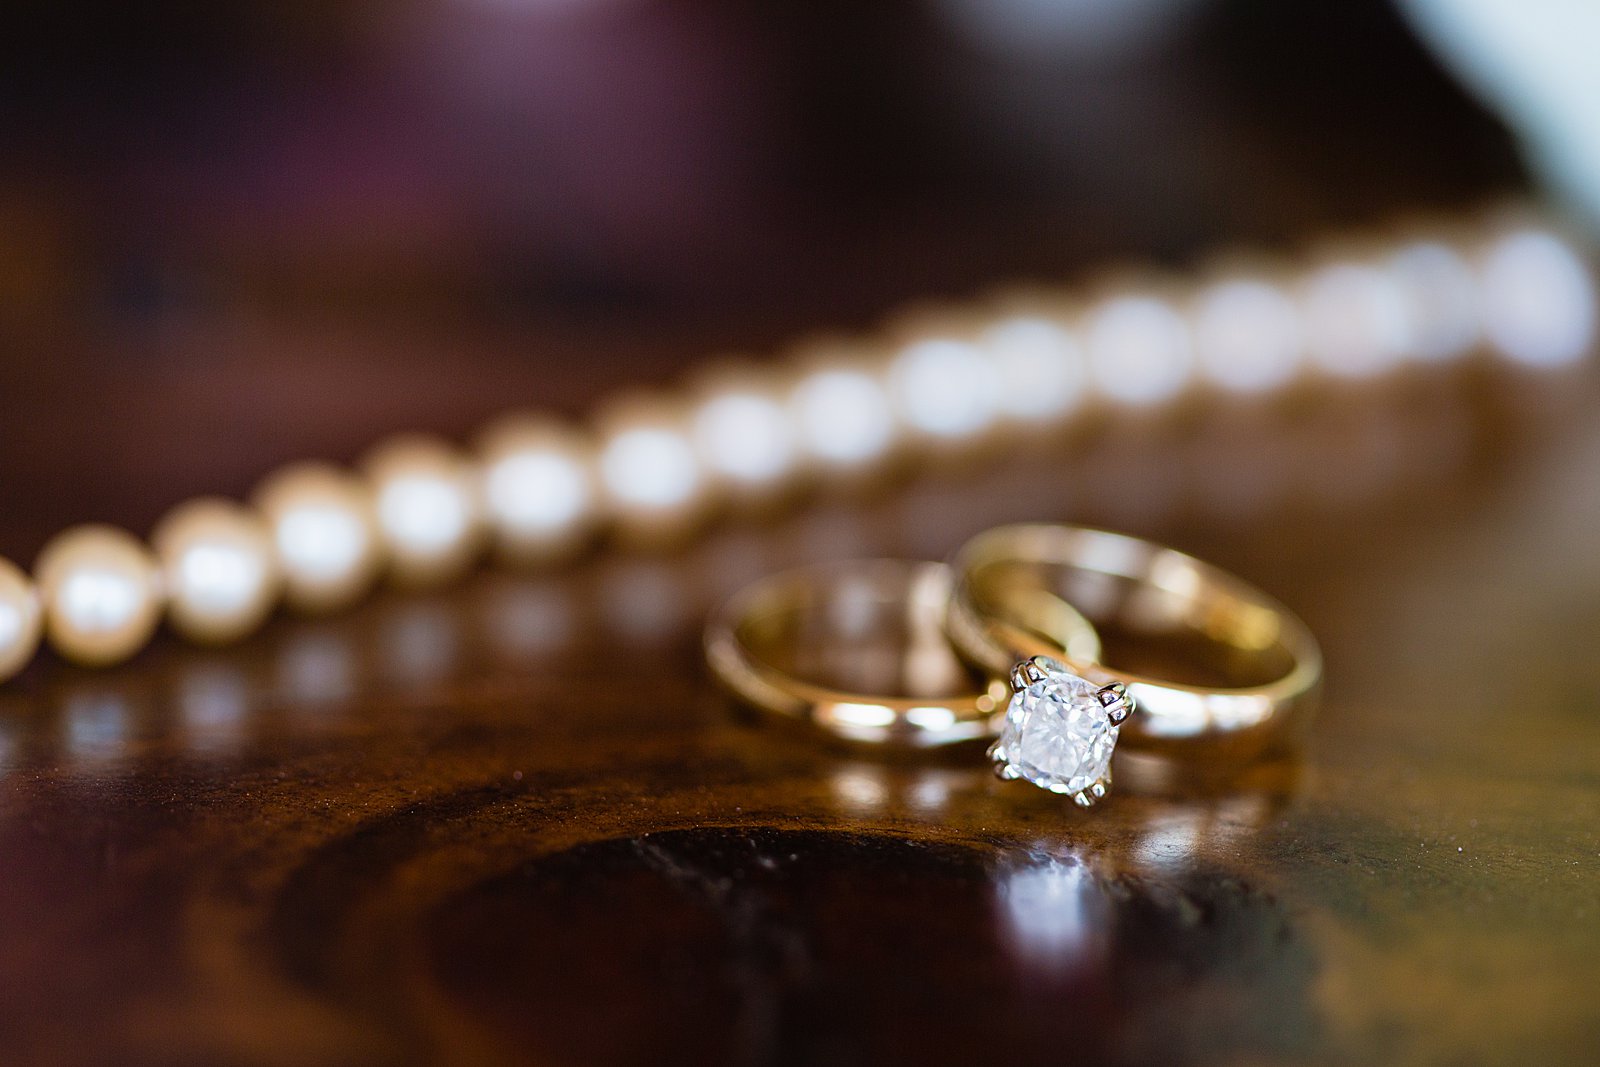 Brides's wedding day details of a simple gold wedding ring set and a pearl bracelet by PMA Photography.